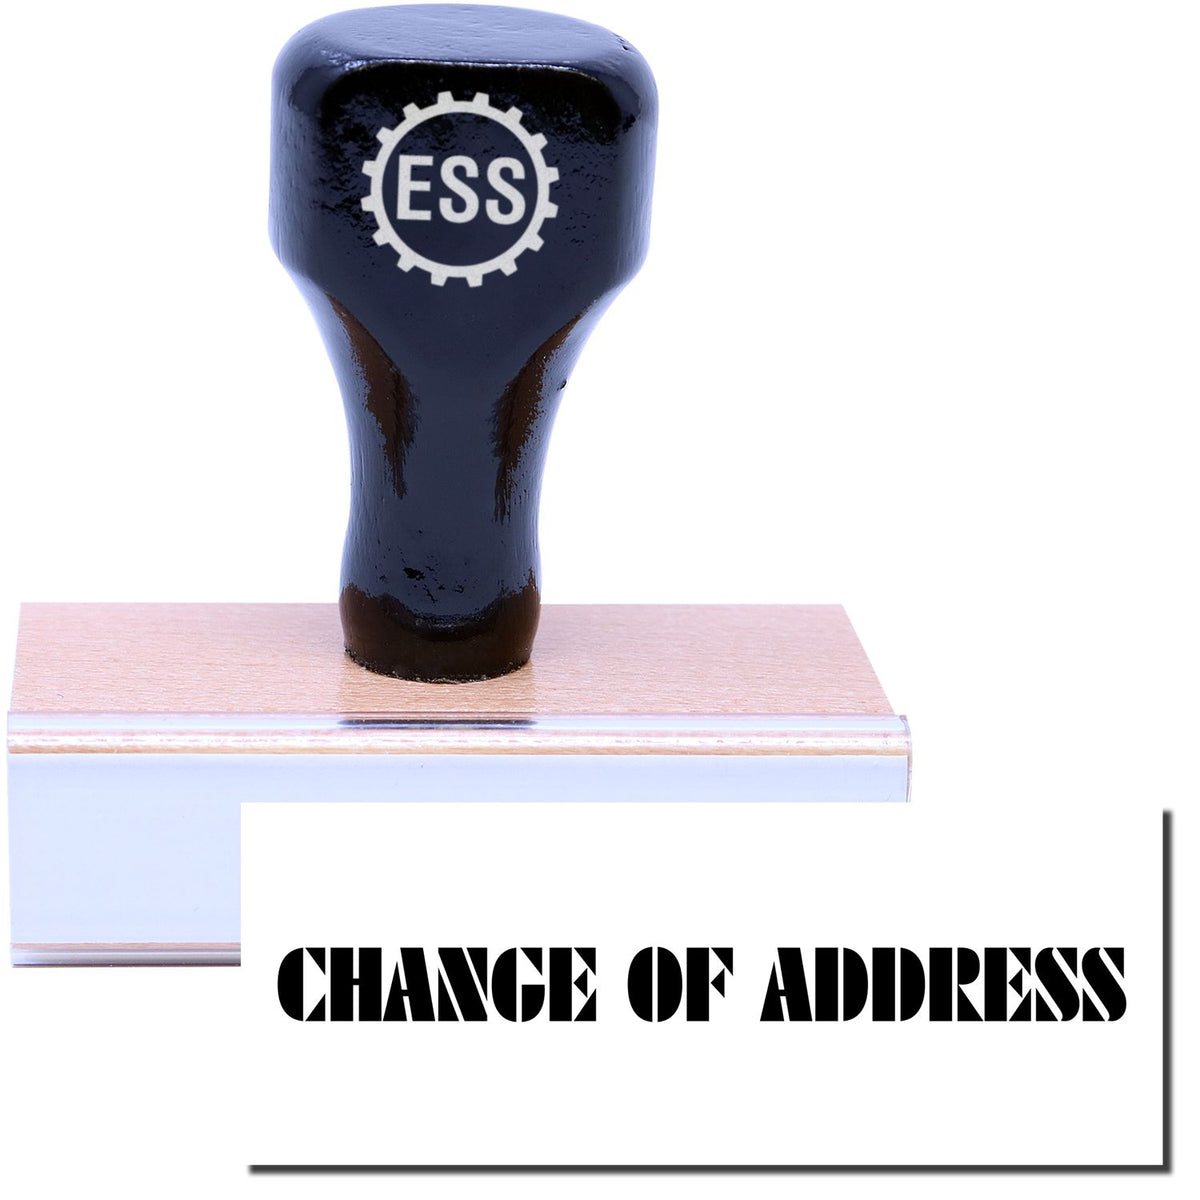 A stock office rubber stamp with a stamped image showing how the text &quot;CHANGE OF ADDRESS&quot; is displayed after stamping.